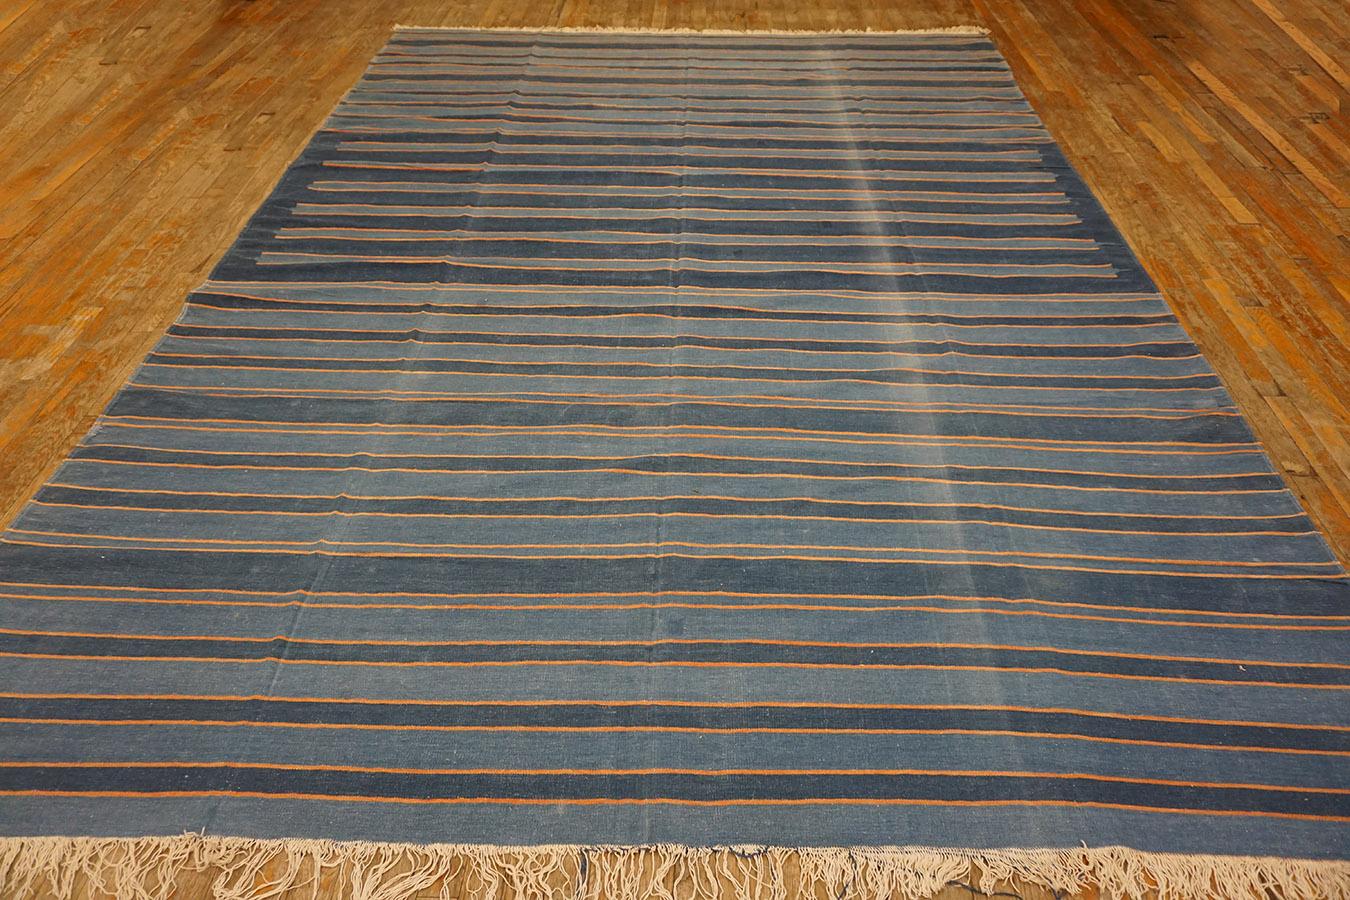 Hand-Woven Early 20th Century Indian Cotton Dhurrie Carpet ( 8'2